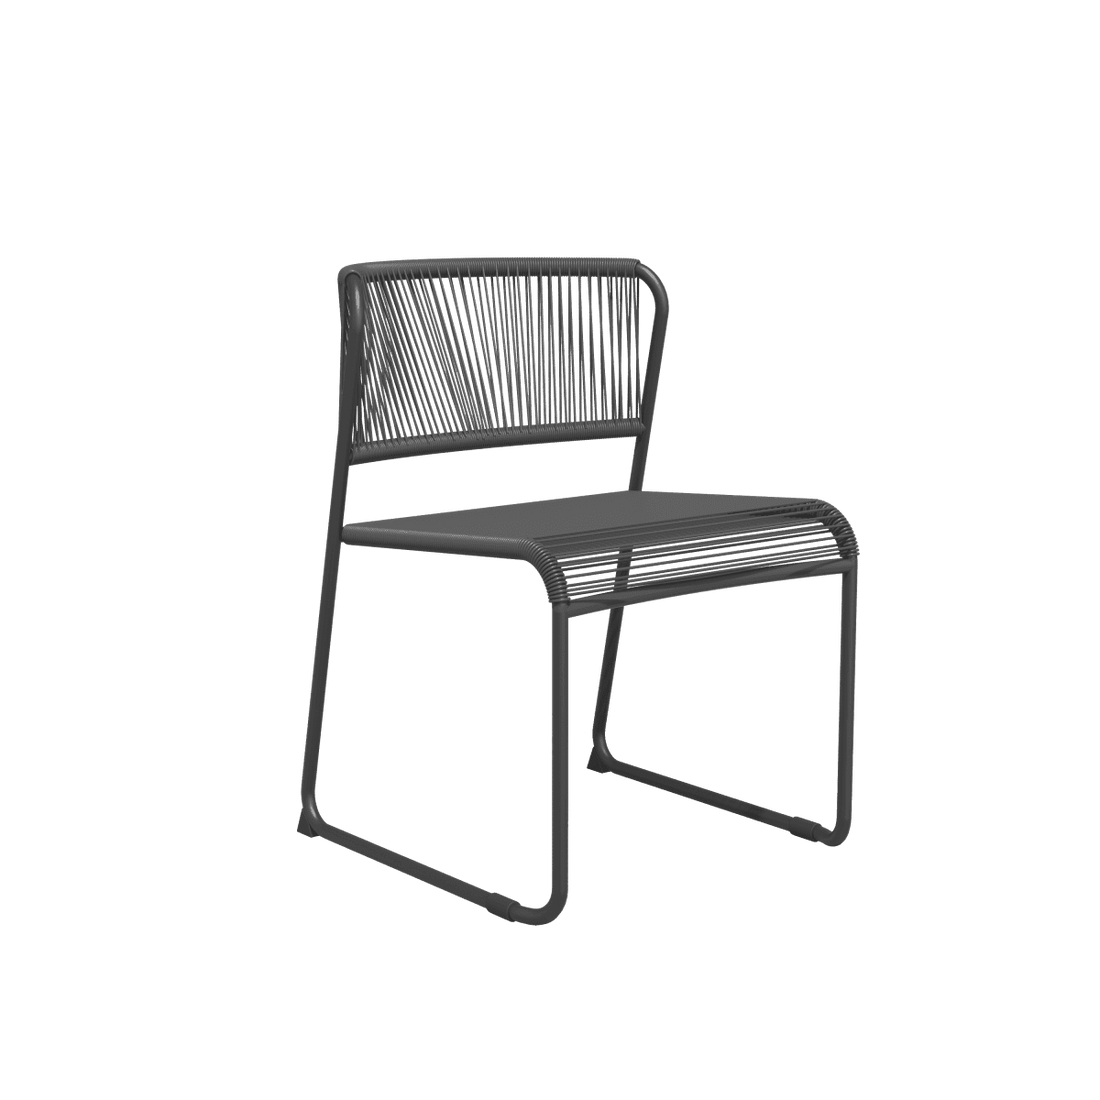 ARMCHAIR DUO NATERIAL Steel and wicker 50X59X71.5H cm anthracite - best price from Maltashopper.com BR500013655